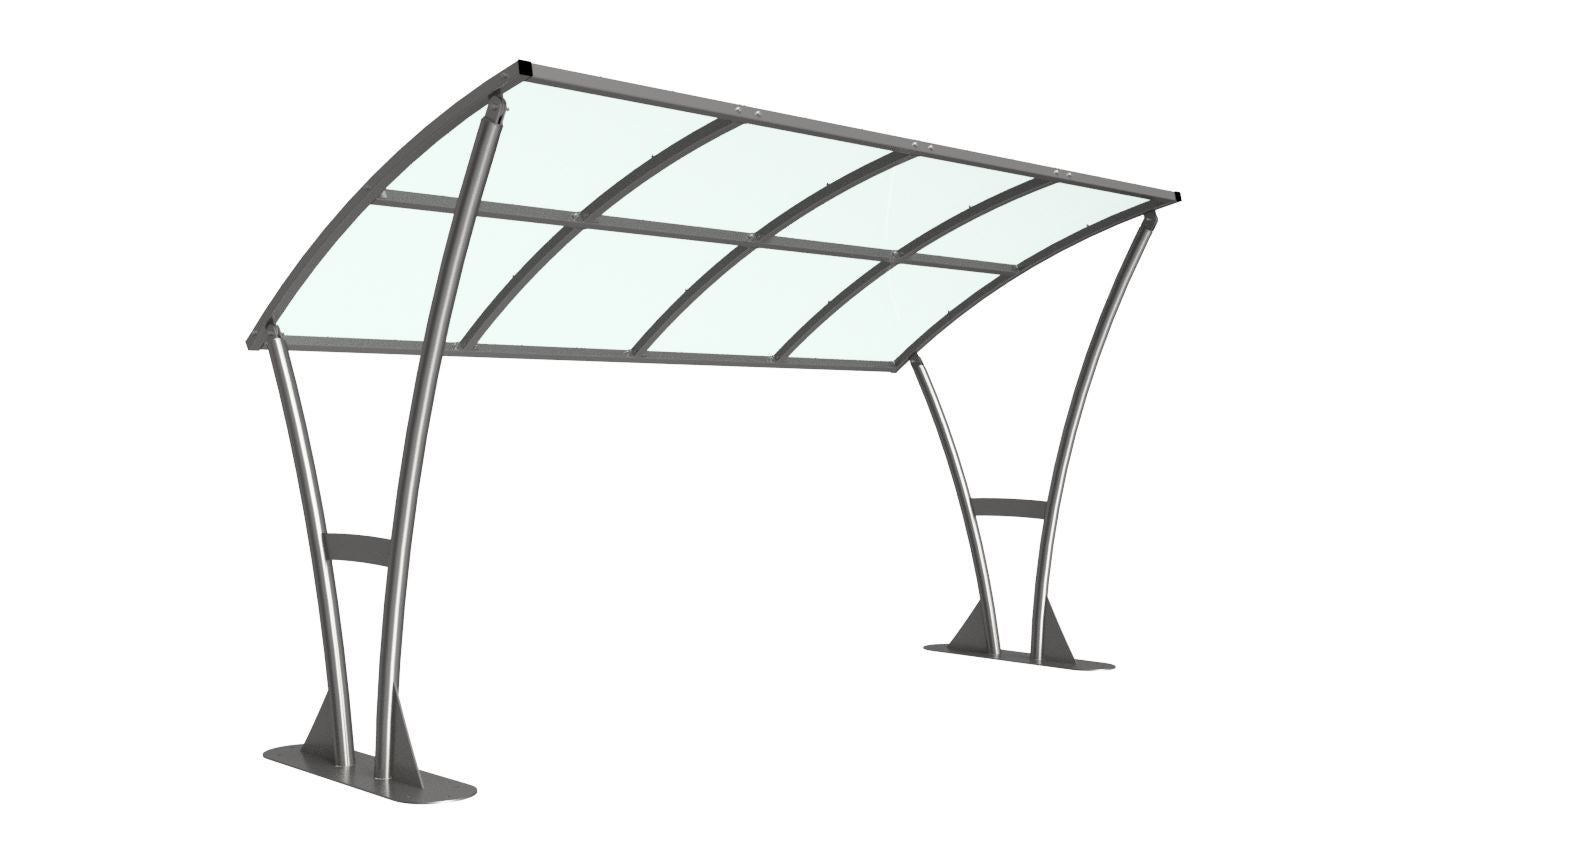 Newton Cycle Shelter With PETG Roof - Galvanised Steel Frame Open Sided